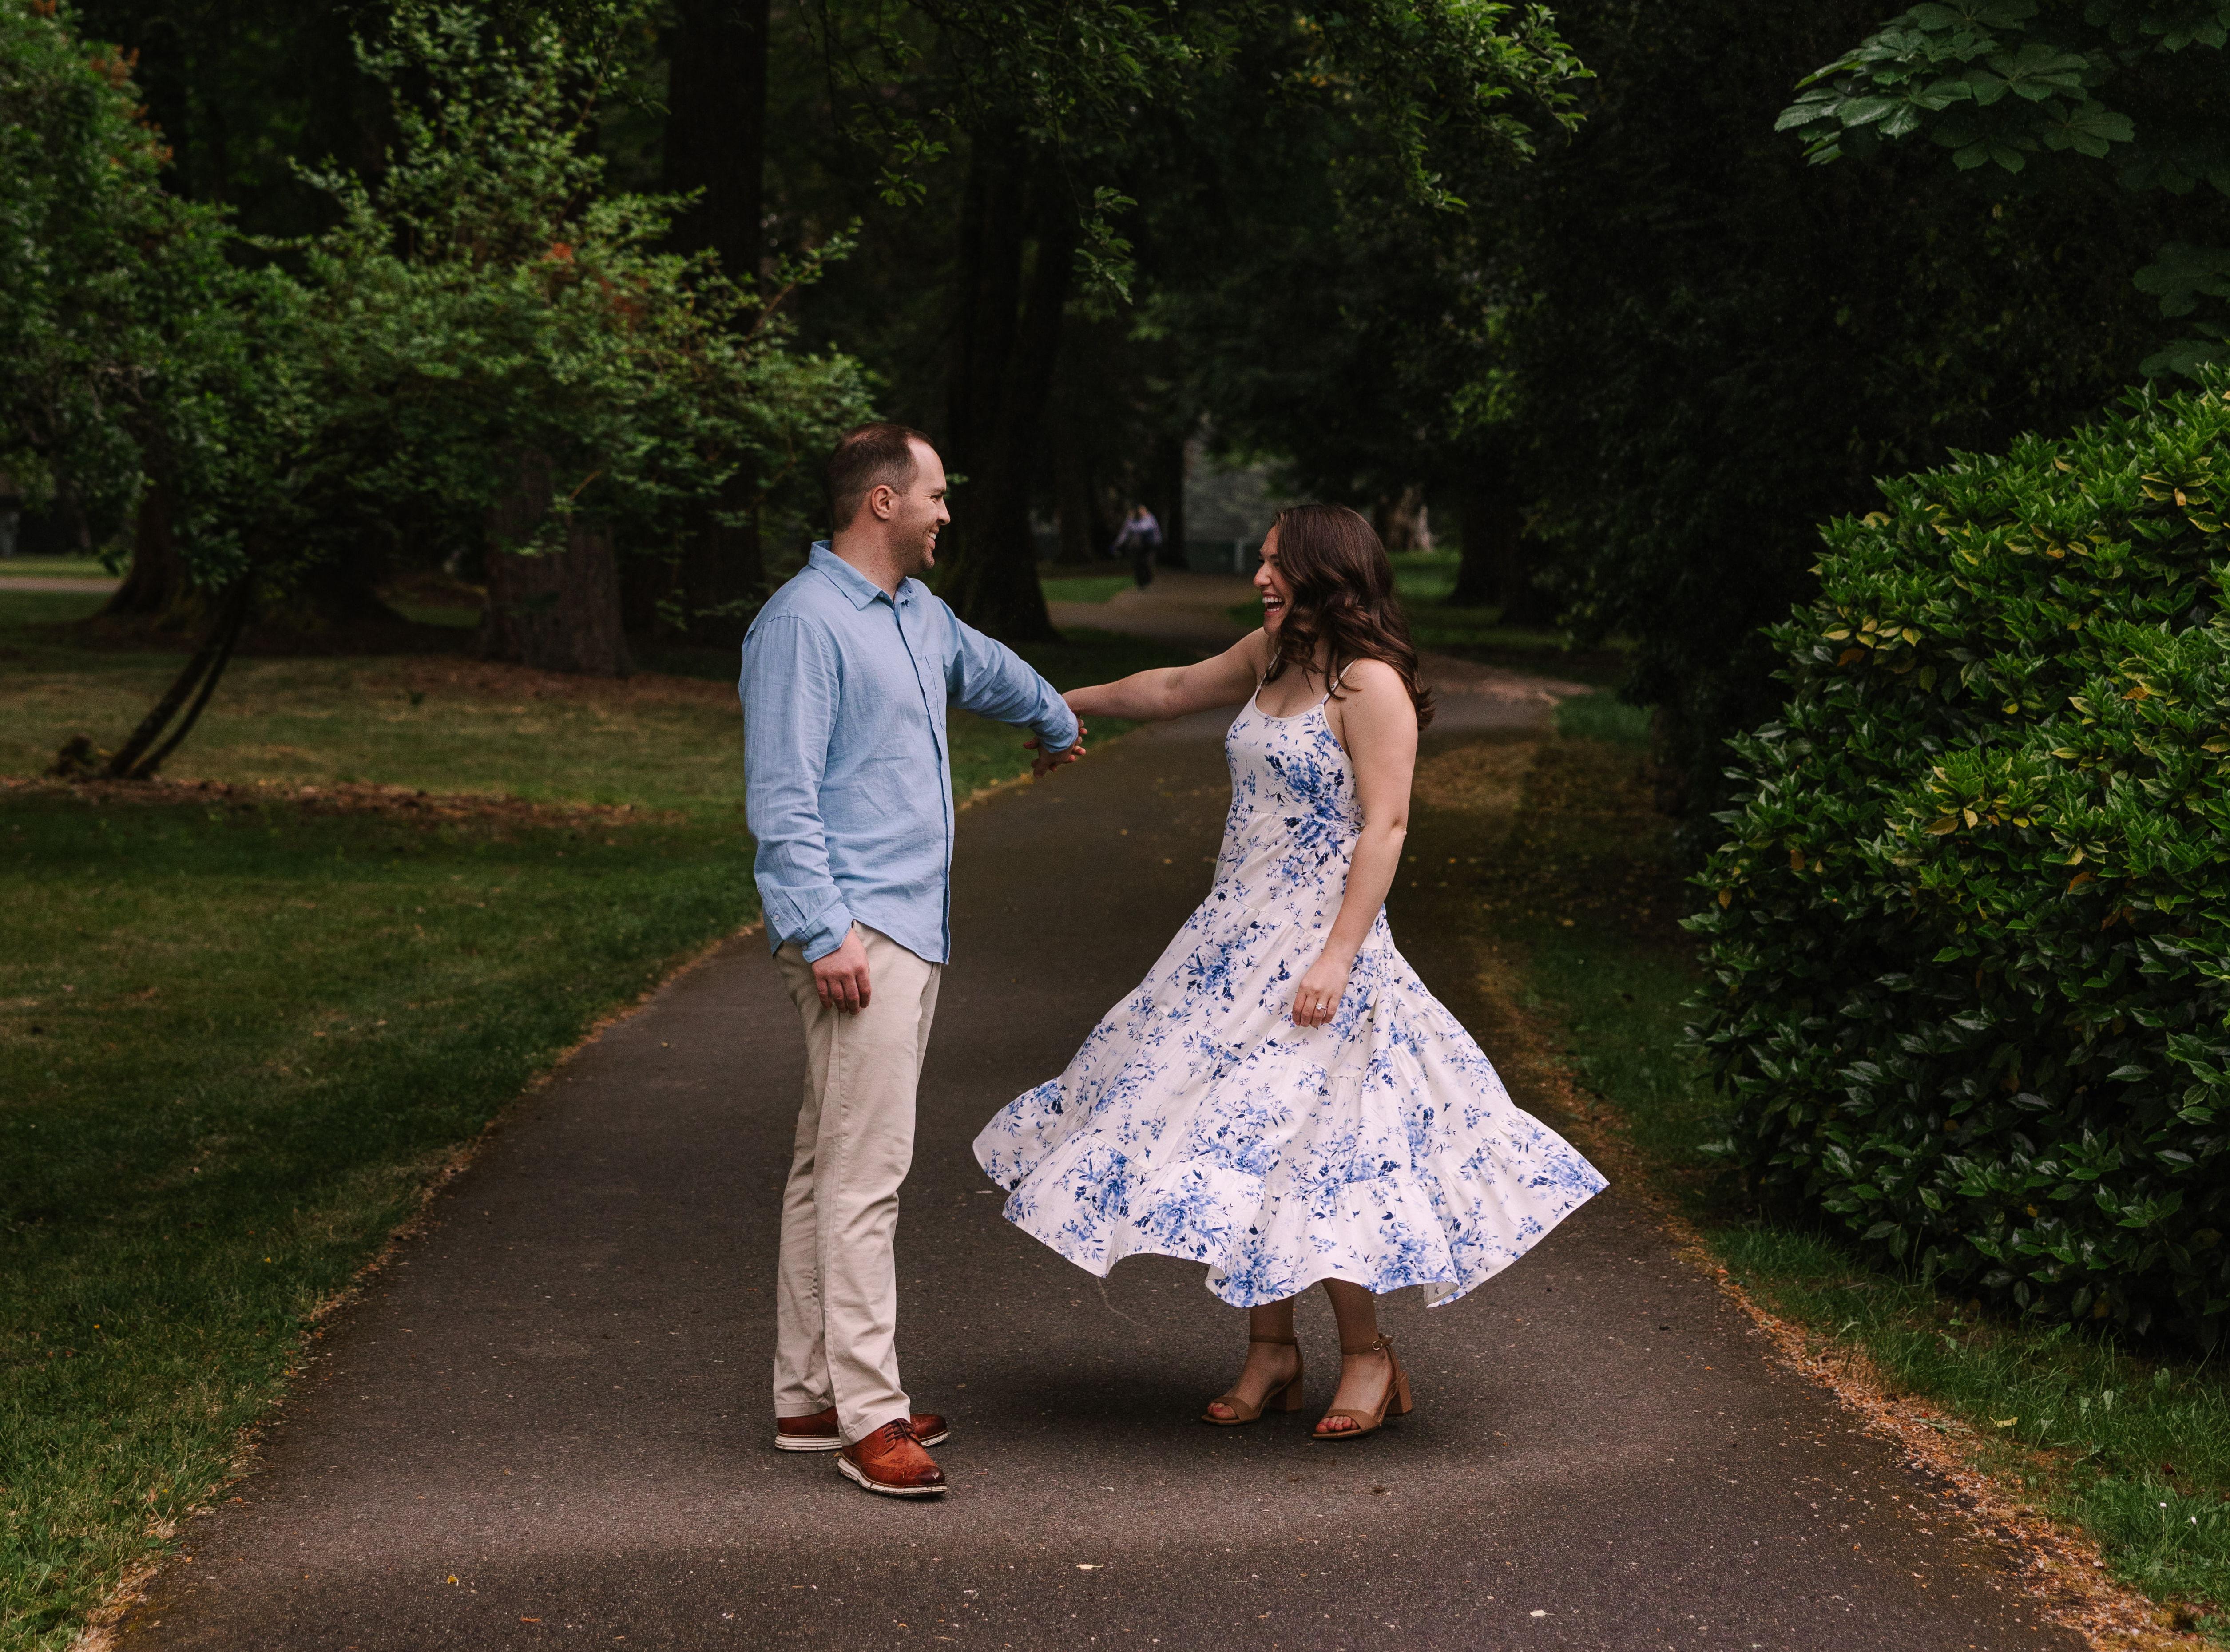 The Wedding Website of Claire Theodorescu and Kyle McMillan